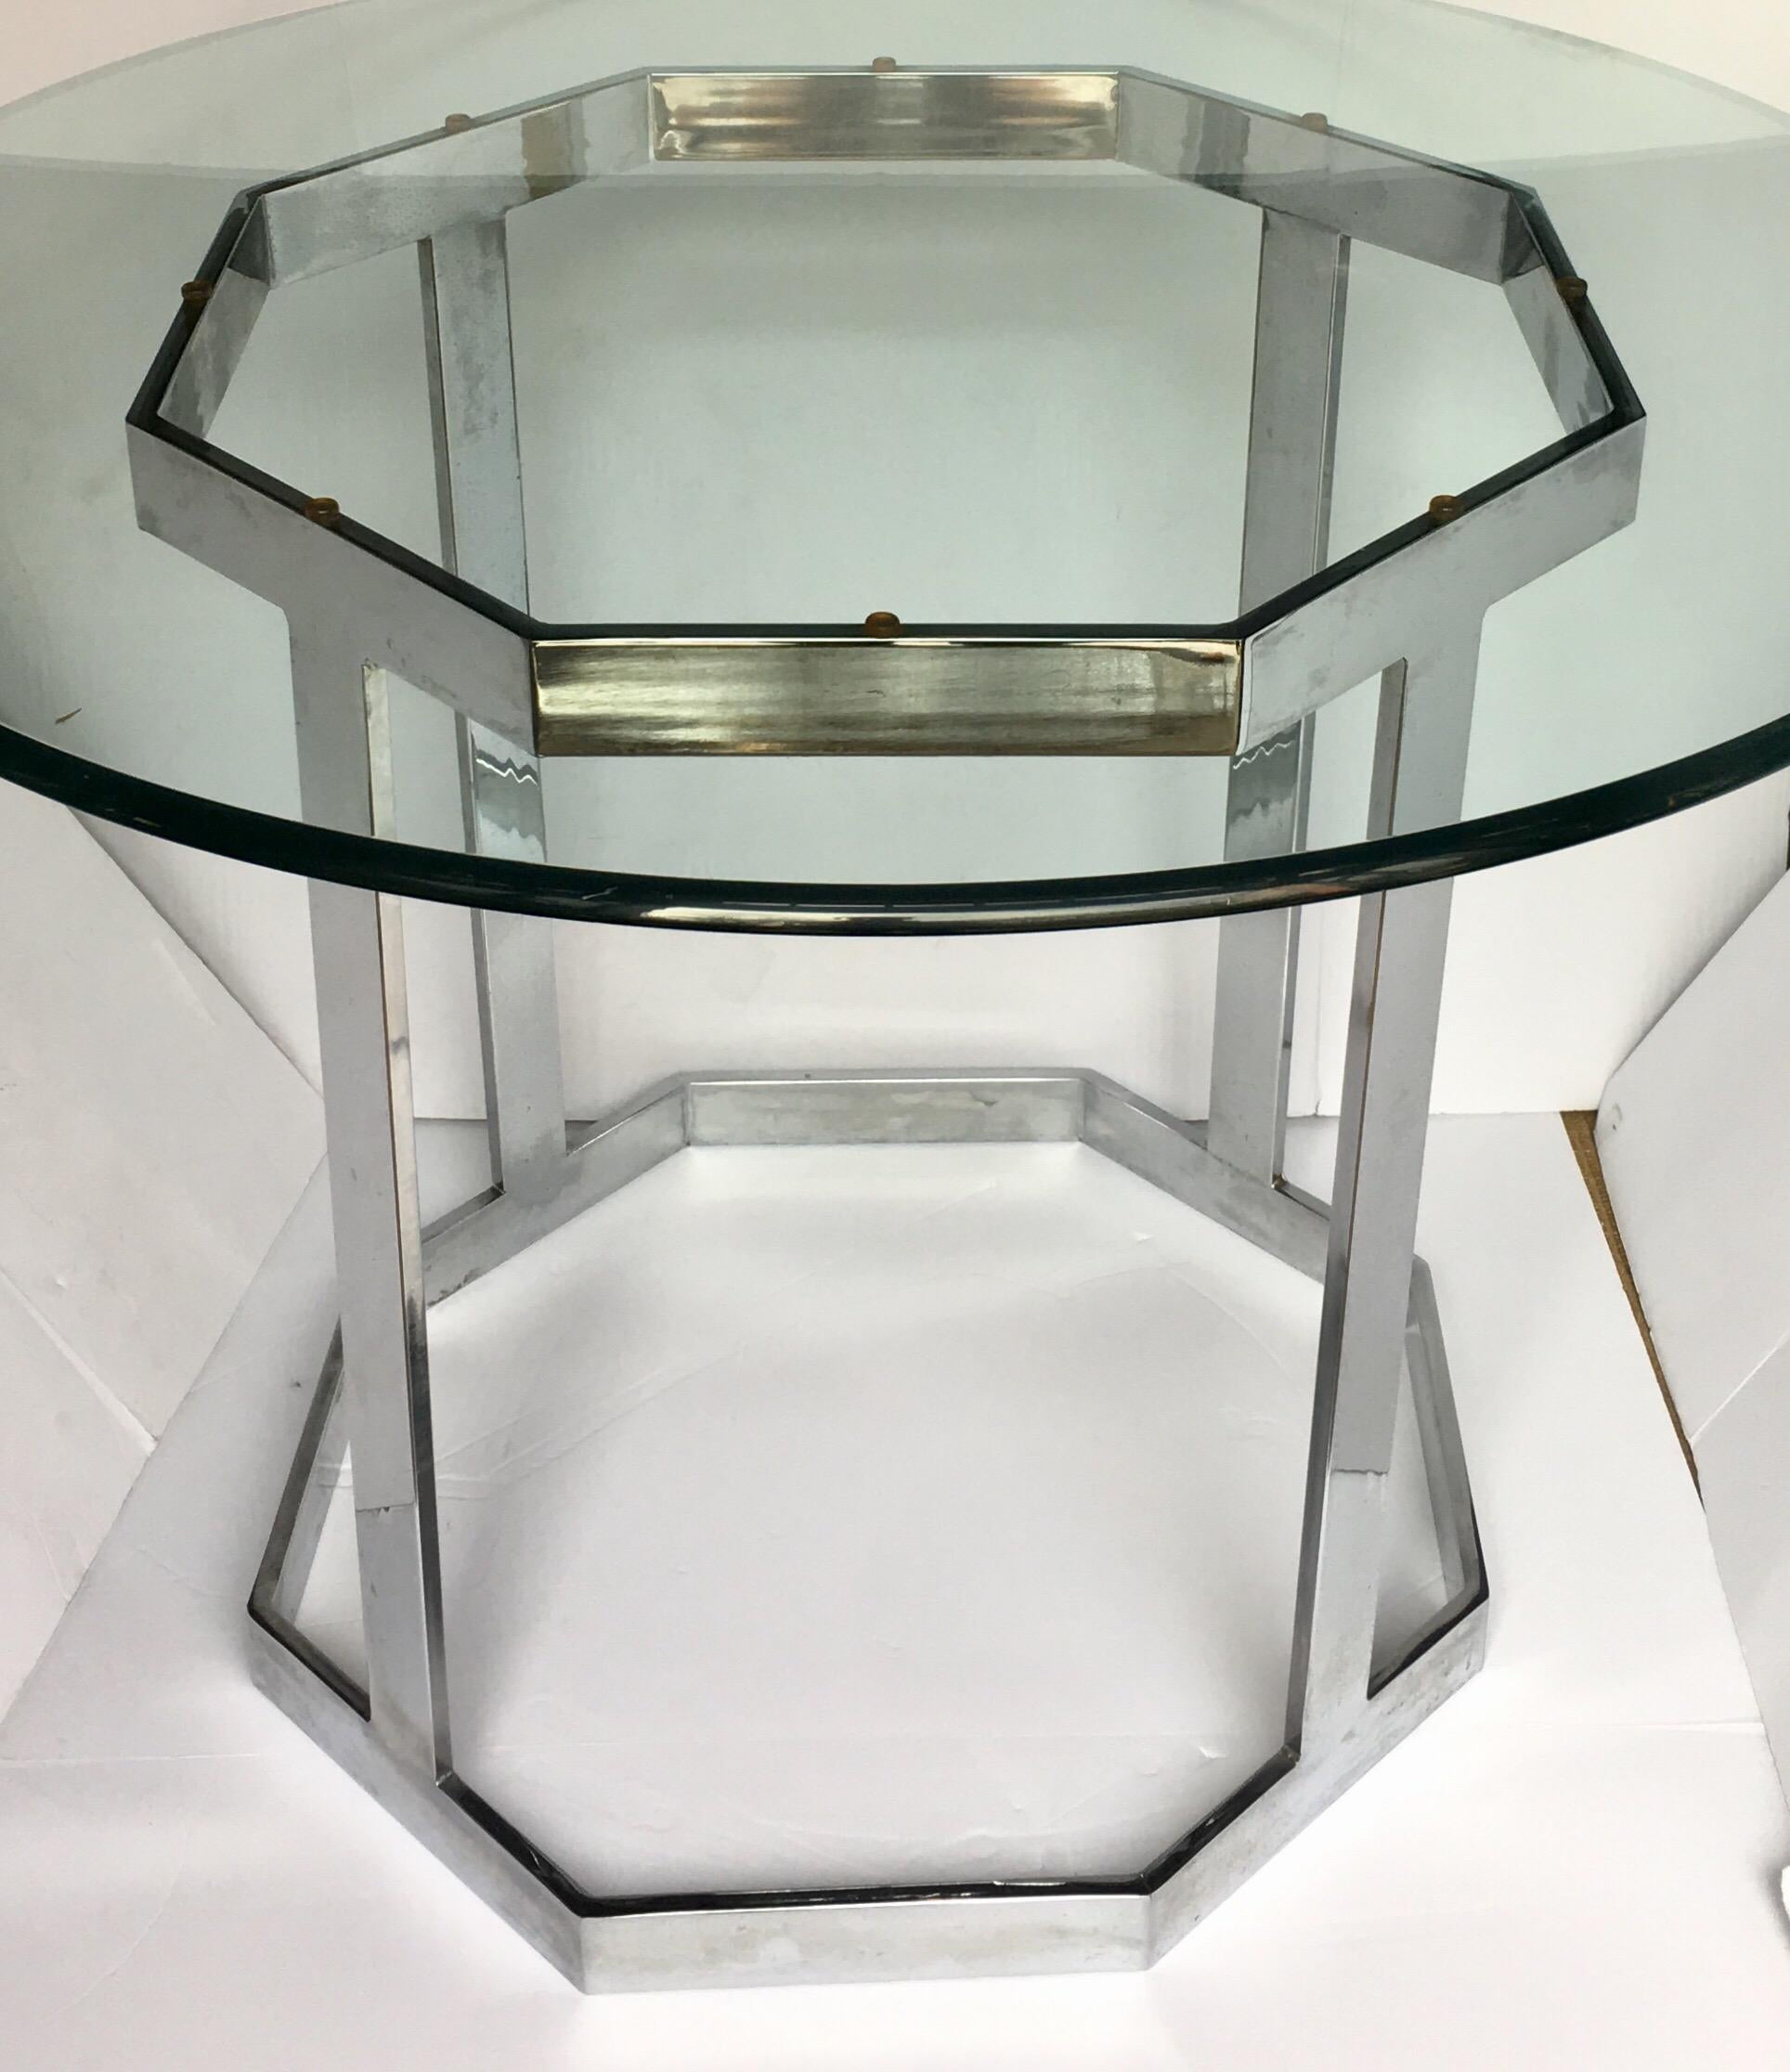 1970s Mid-Century Modern chrome and glass dining or center table in the style of Milo Baughman. Sculptural polished chrome base features a flat bar octagon design. Existing round clear glass top is removable and can be replaced with a larger size